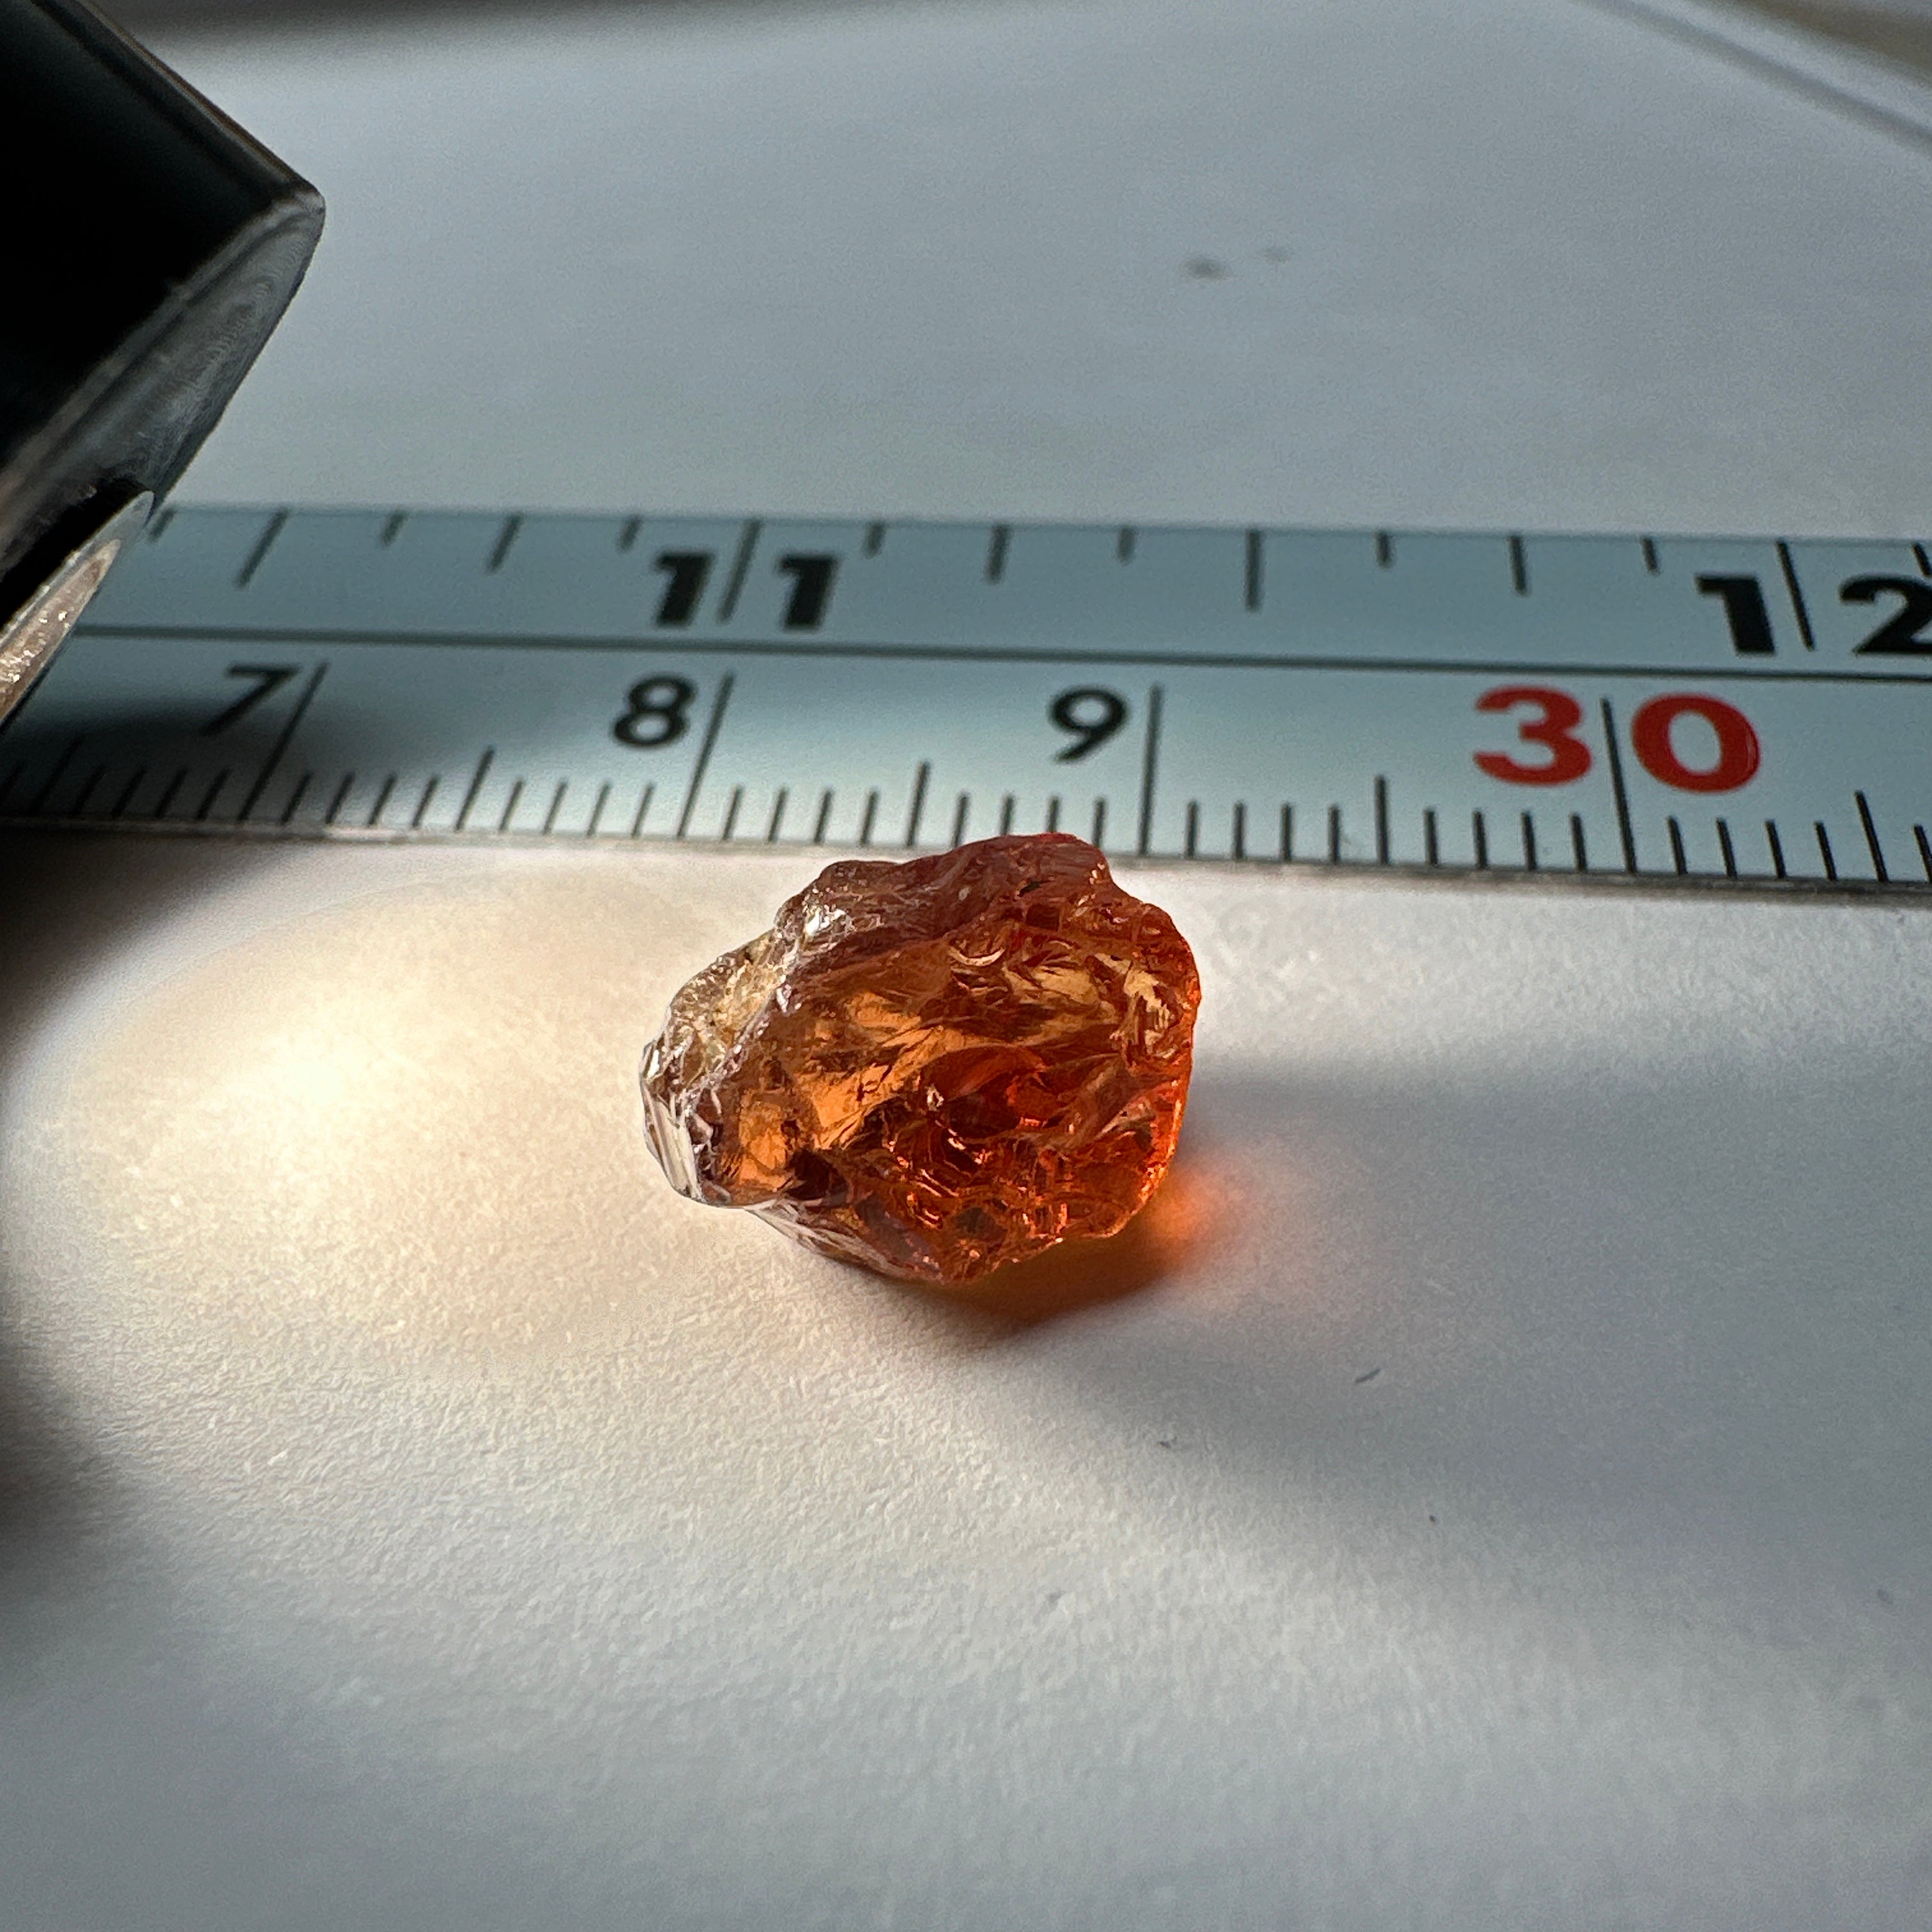 4.75ct Colour Change Garnet, Tanzania, Untreated Unheated, one spot on the outside, rest vvs-if